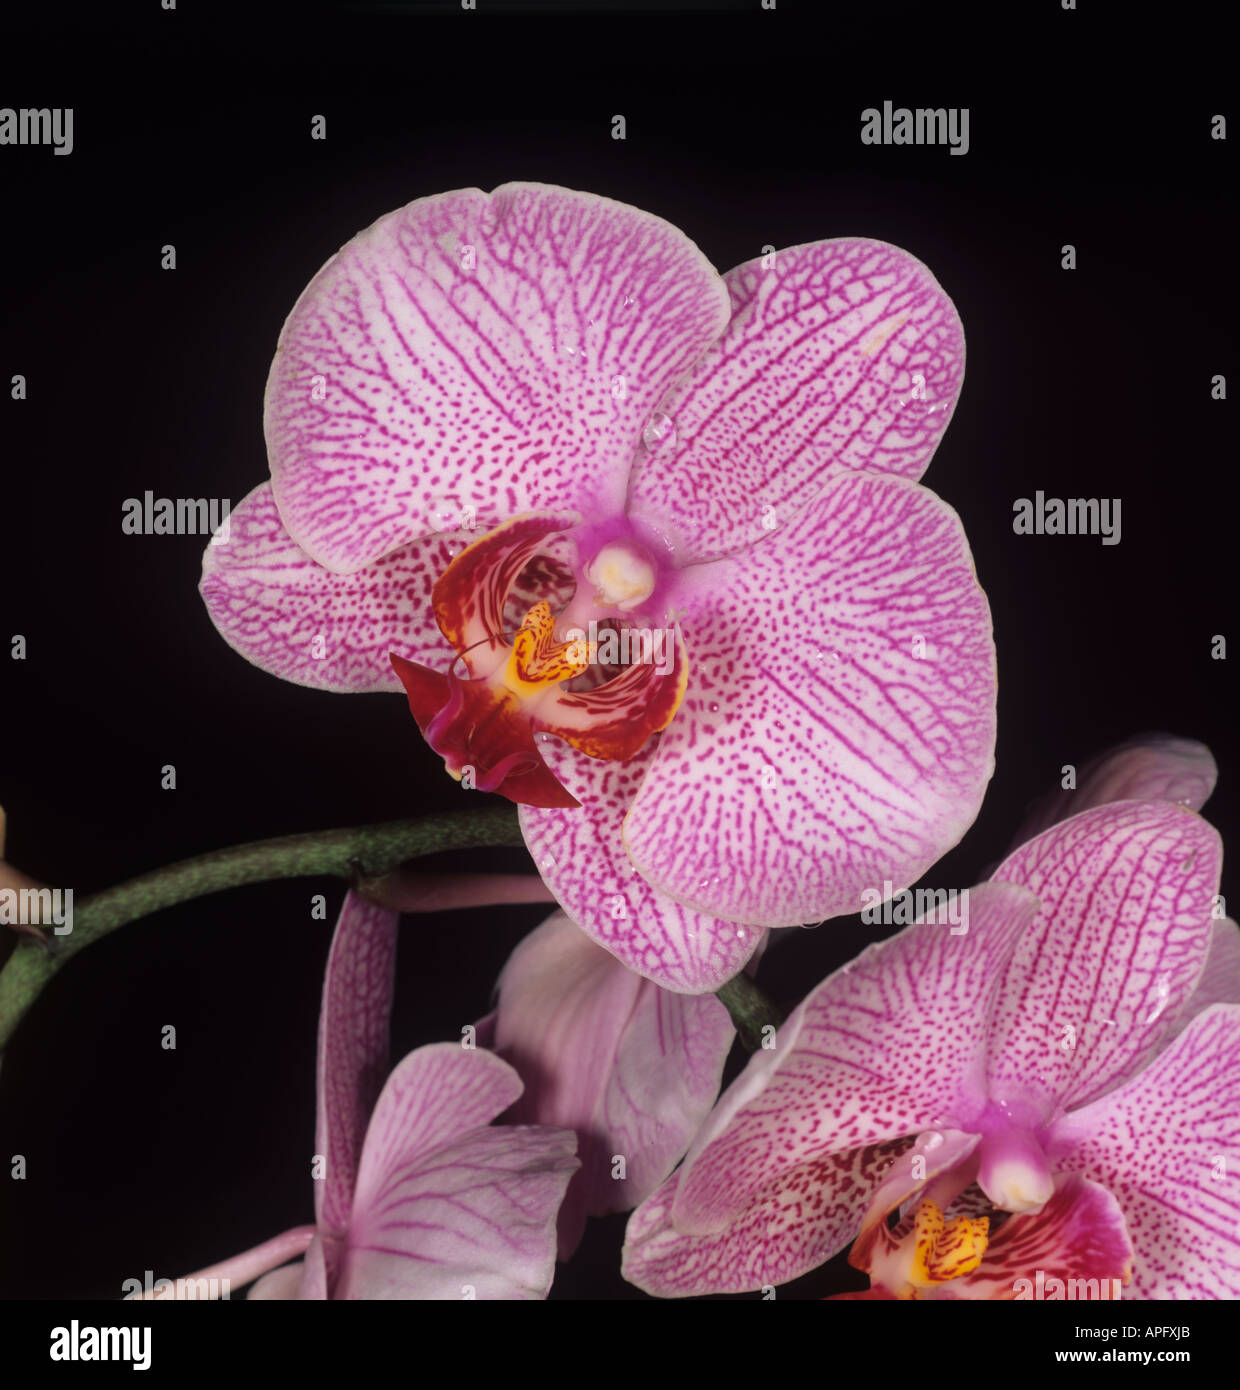 Intergenetic cross orchid Cambria flower Stock Photo